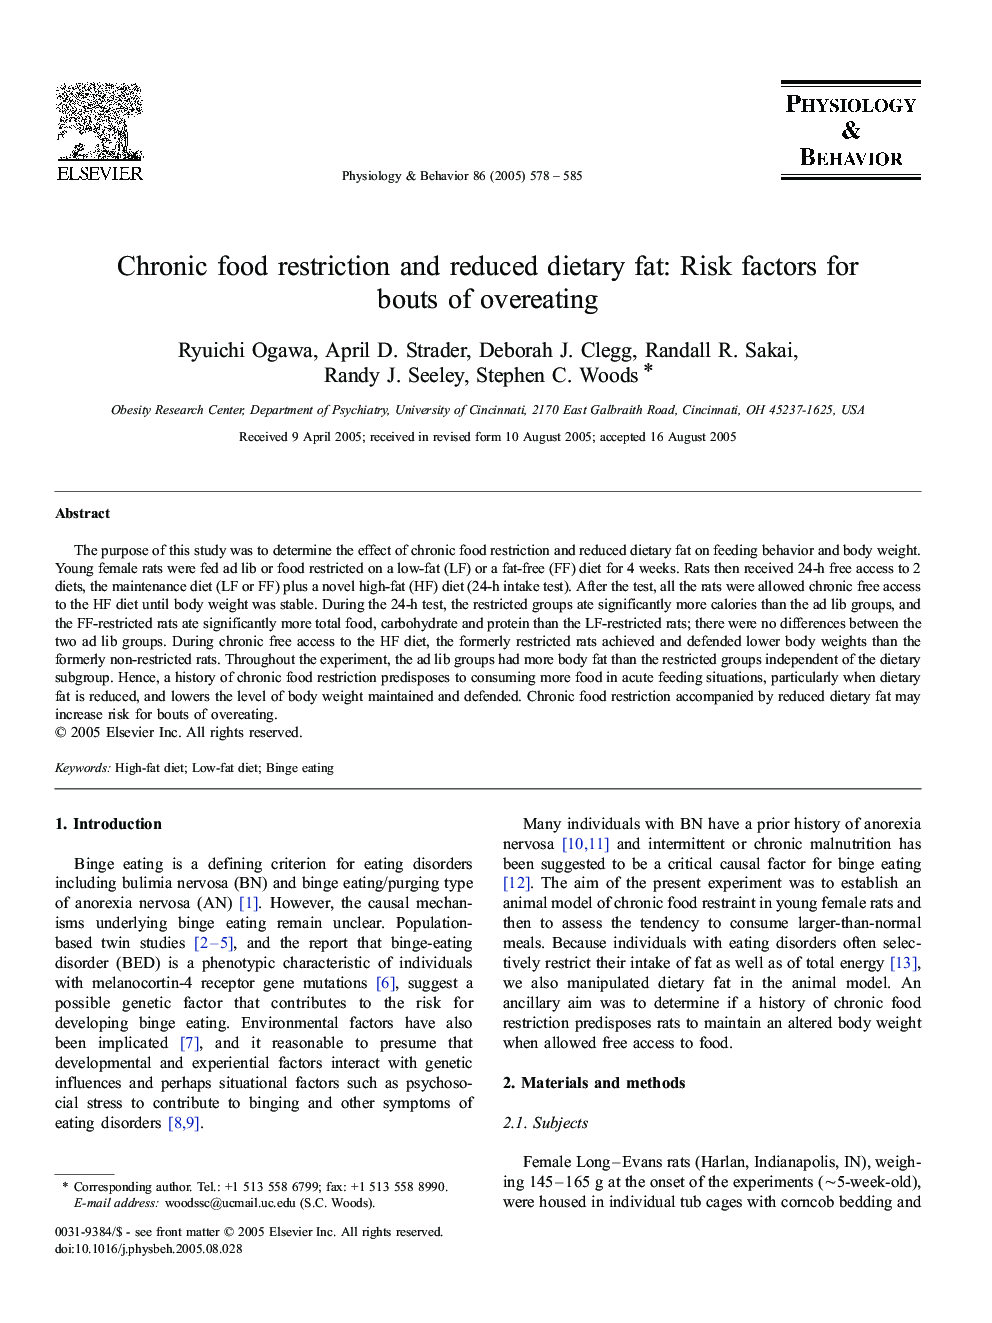 Chronic food restriction and reduced dietary fat: Risk factors for bouts of overeating